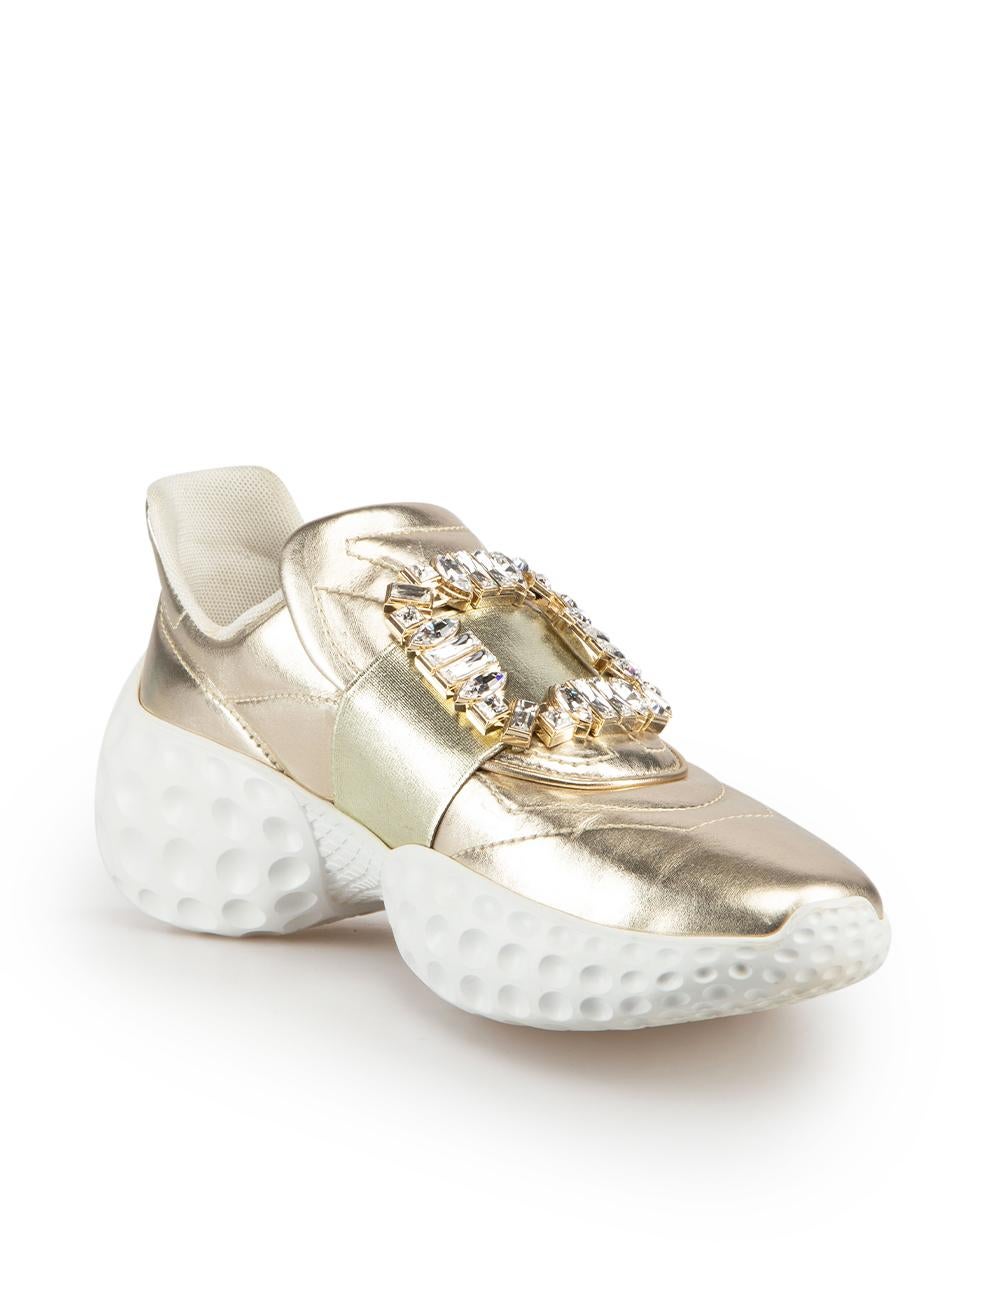 CONDITION is Very good. Minimal wear to trainers is evident. Minimal wear to both sides of both trainers with light scratches to the leather on this used Roger Vivier designer resale item.
 
 Details
 Gold
 Leather
 Low top trainers
 Round toe
